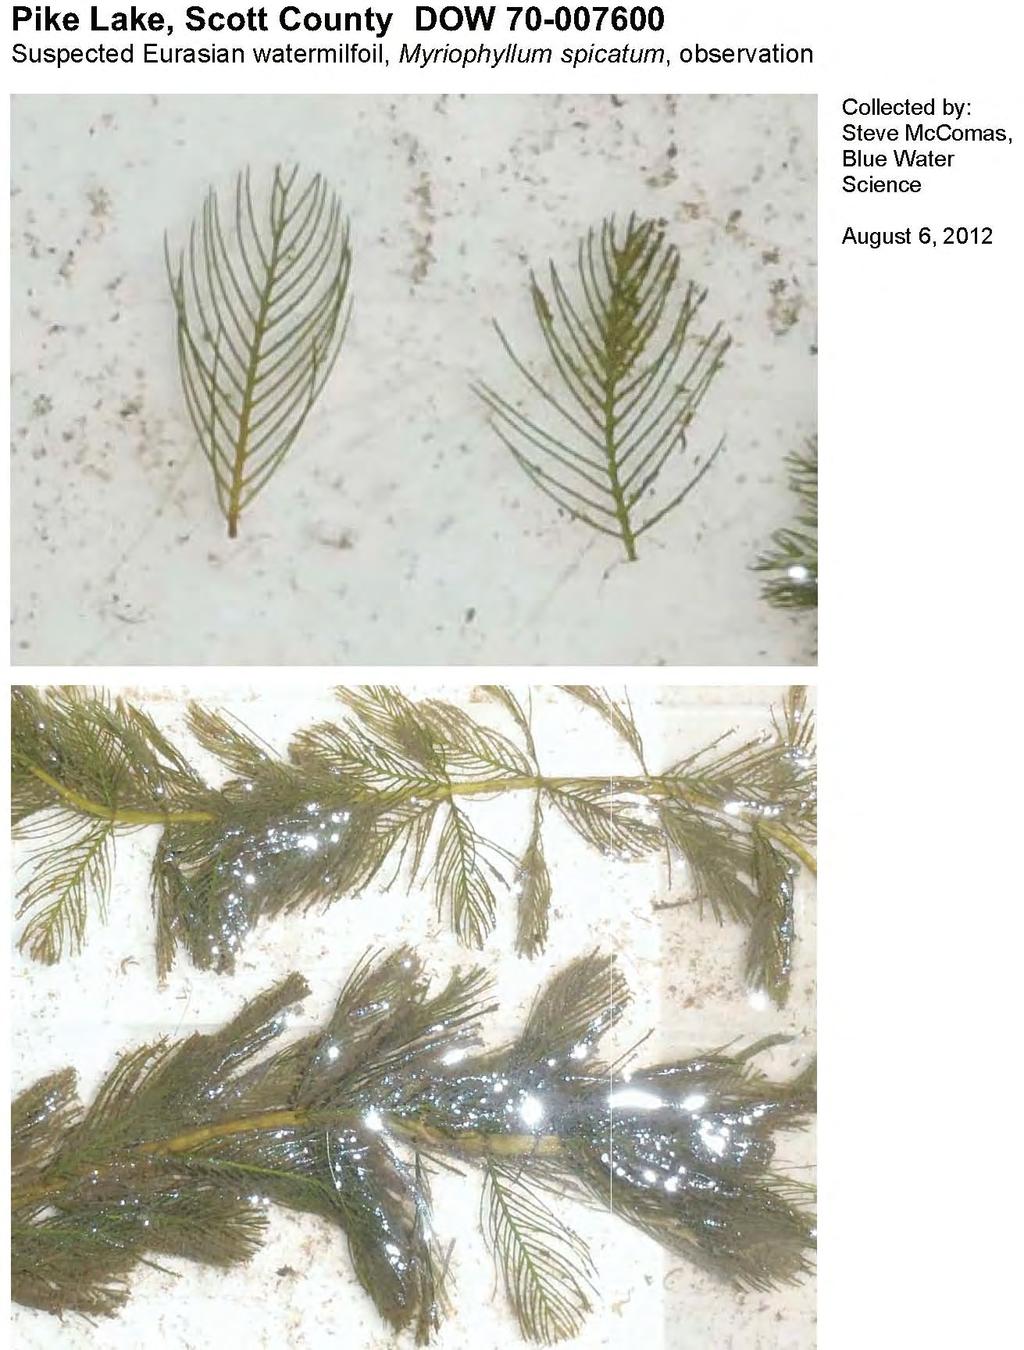 APPENDIX Eurasian Watermilfoil Was Collected from a Site North of